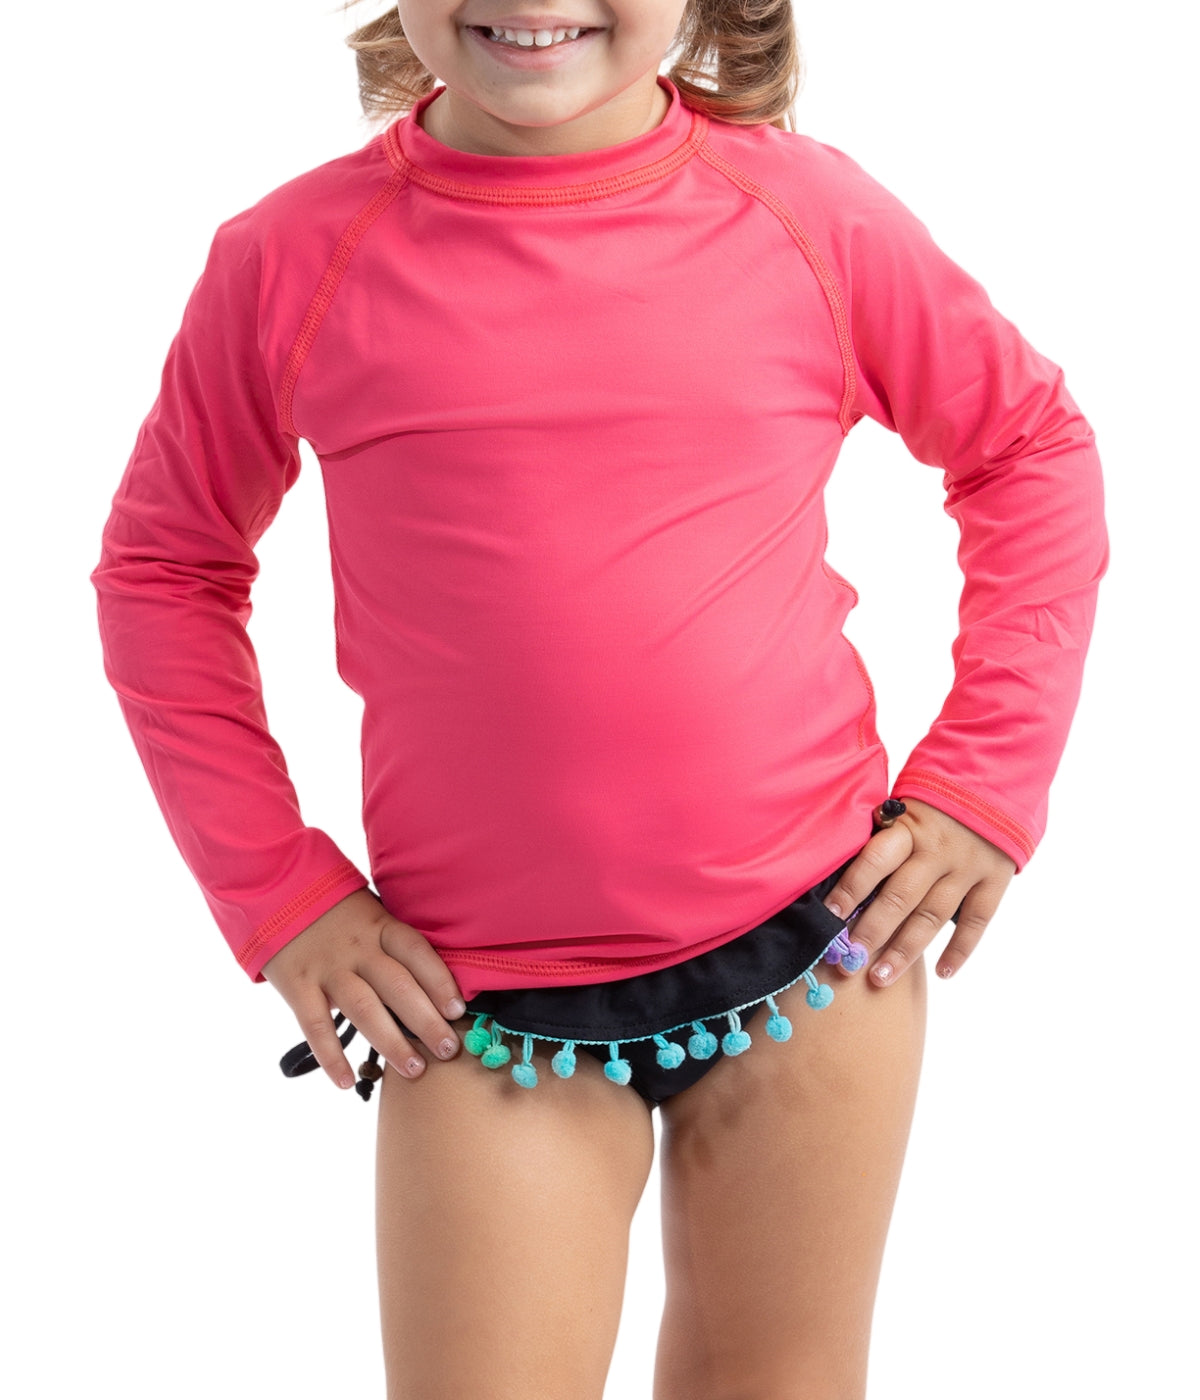 BloqUV Toddlers' UPF 50+ Sun Protection Long Sleeve Crew Neck Top-4T-Watermelon-1